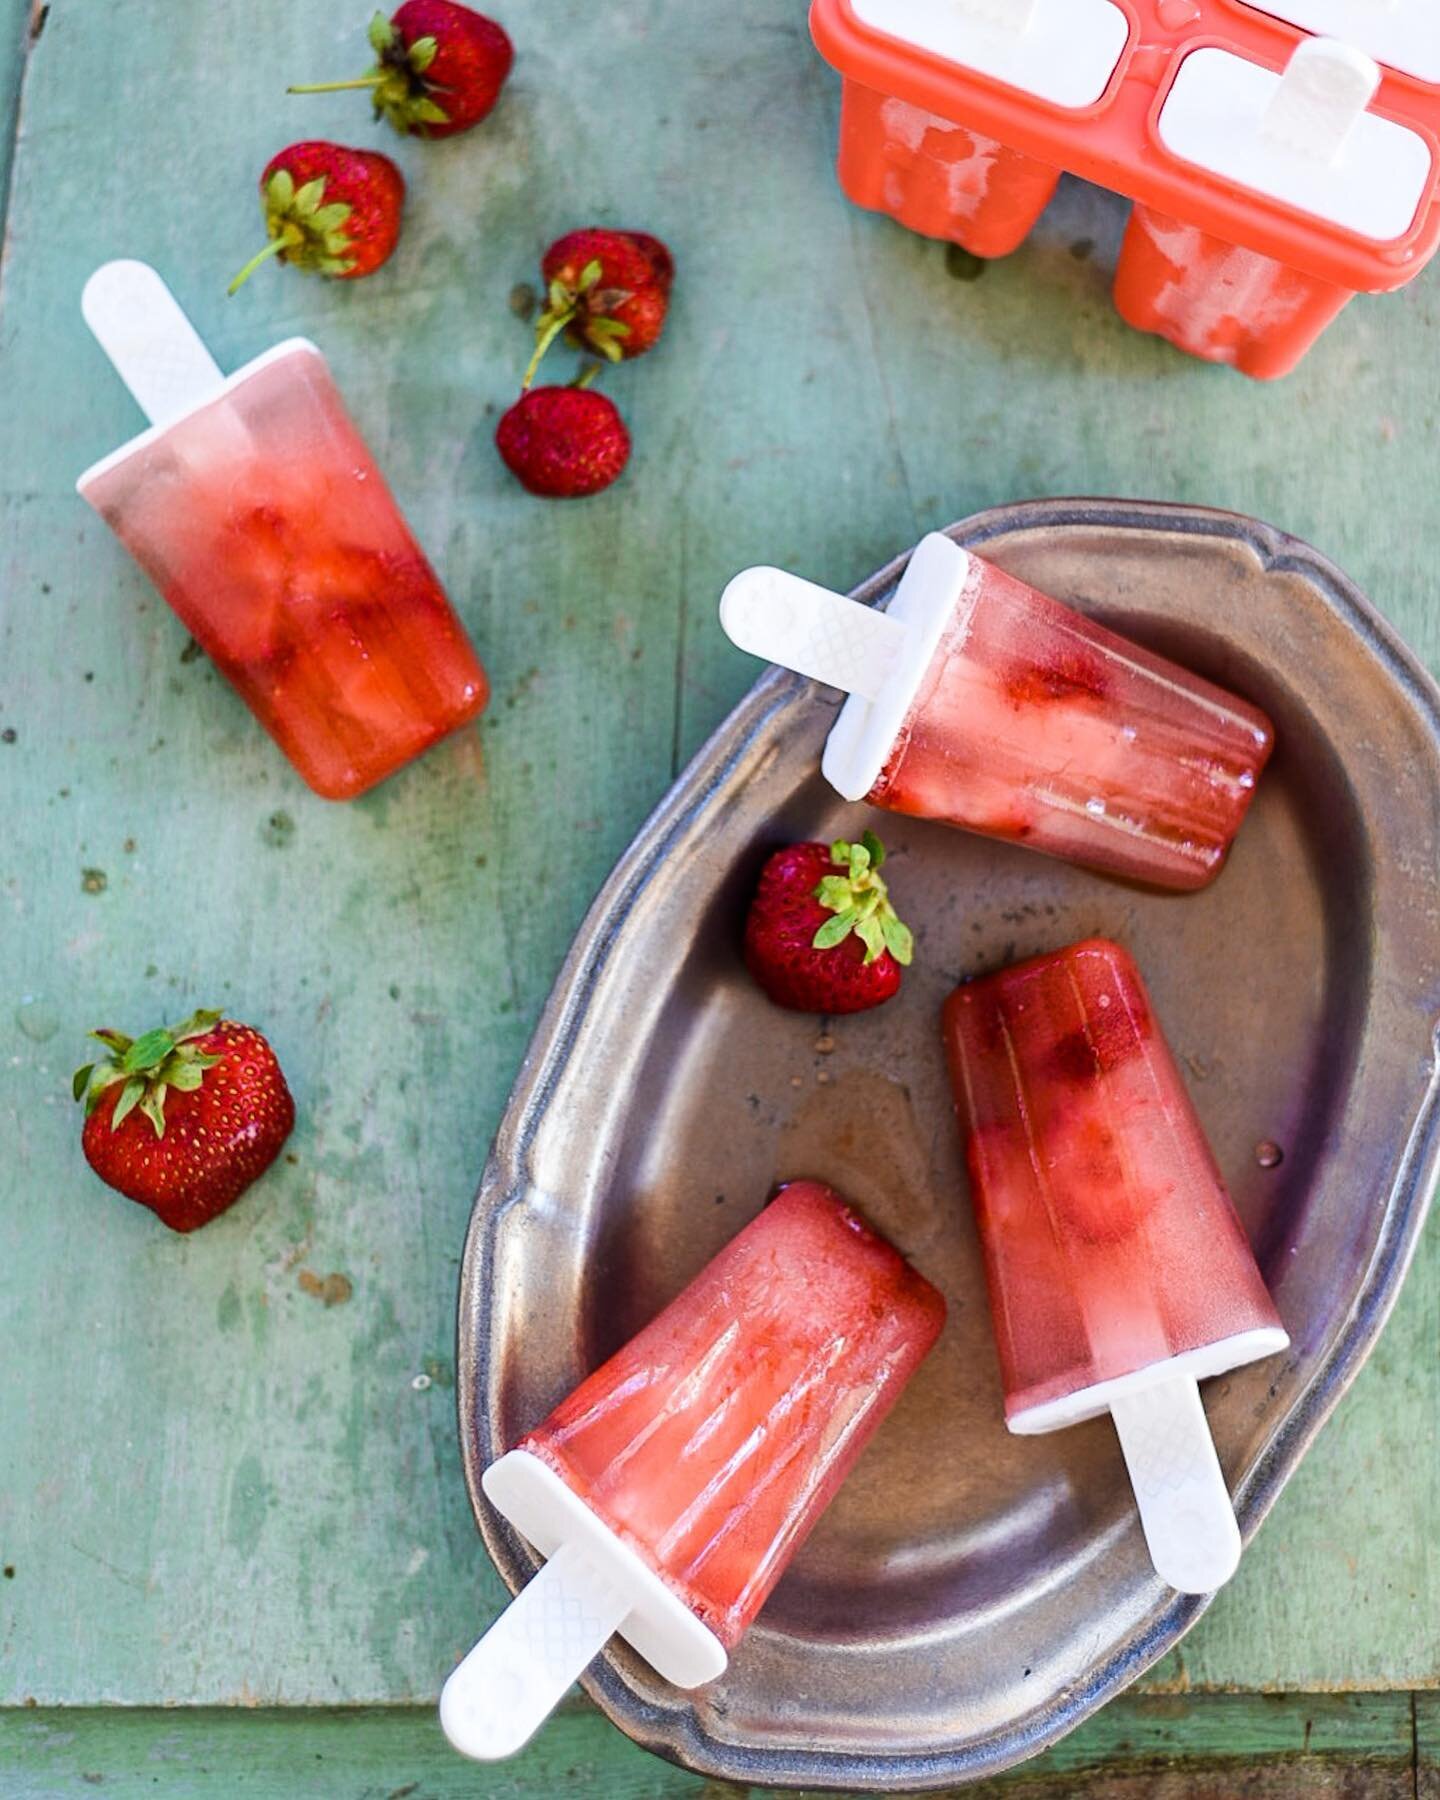 🍓 P O P . . . P O P . . . P O P S I C L E S 🍓

Wow! The heat is still on here. We are sooo glad we went berry picking earlier this week because now we have ice pops in the fridge for days just like this. Just water and Slices of strawberries makes 